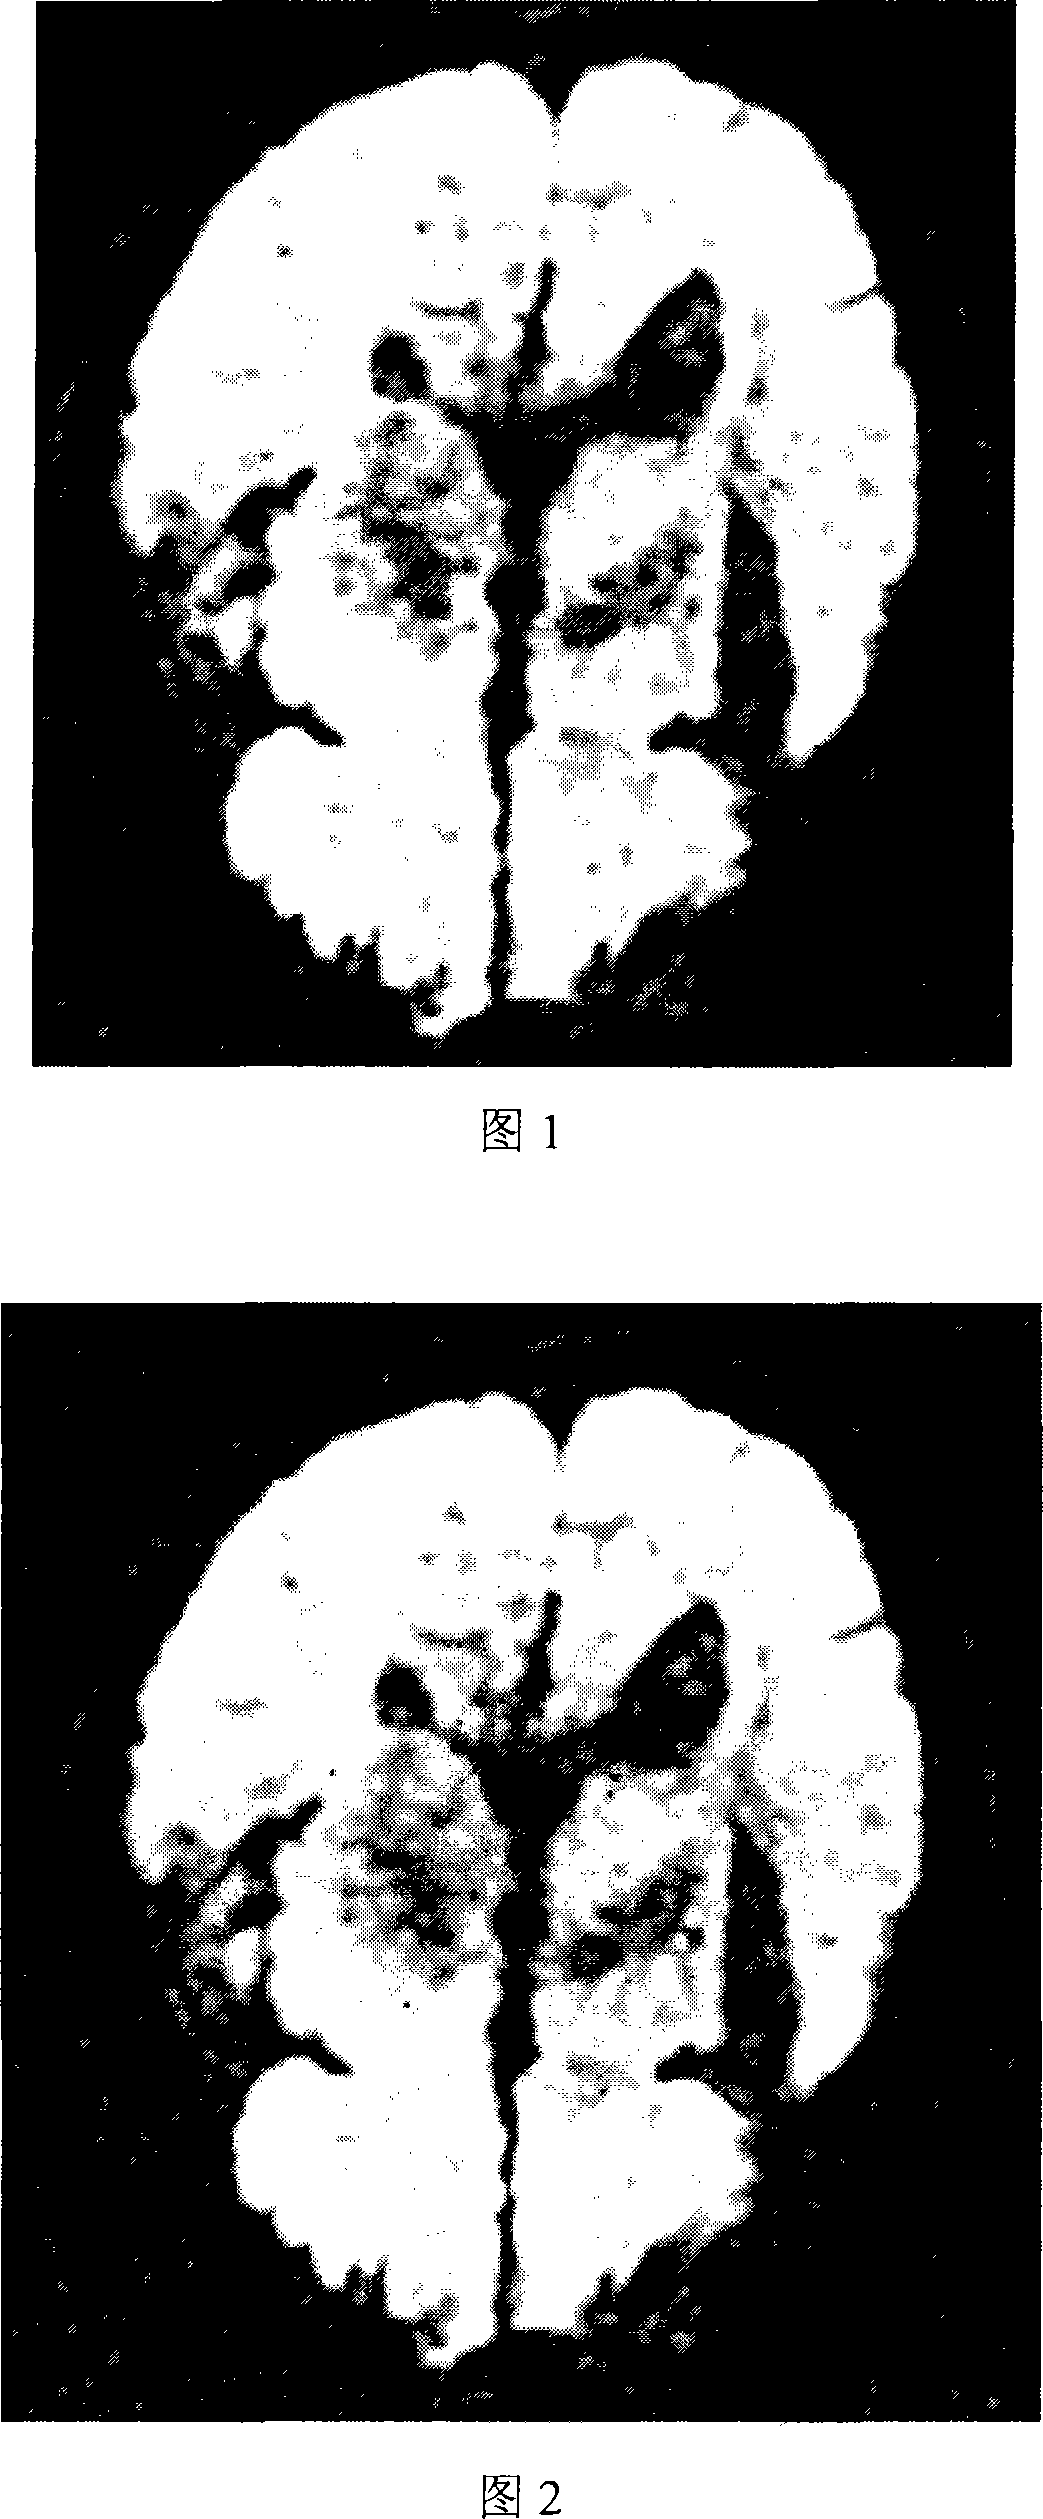 Recovery processing method for diffusion tensor magnetic resonance image